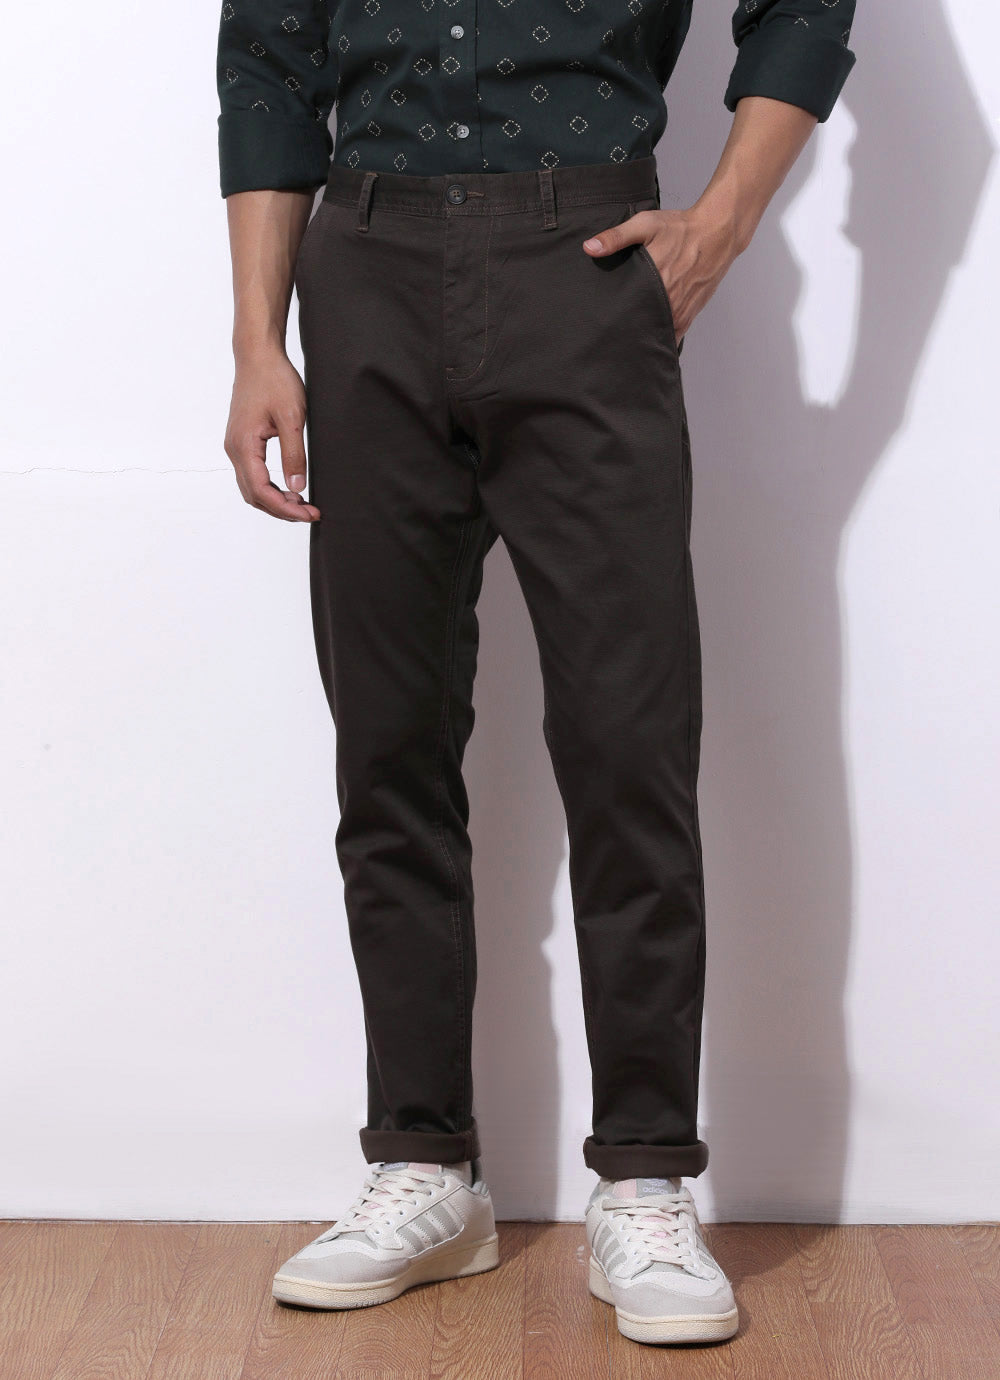 Roasted Brown- Slim Fit Cotton Trouser